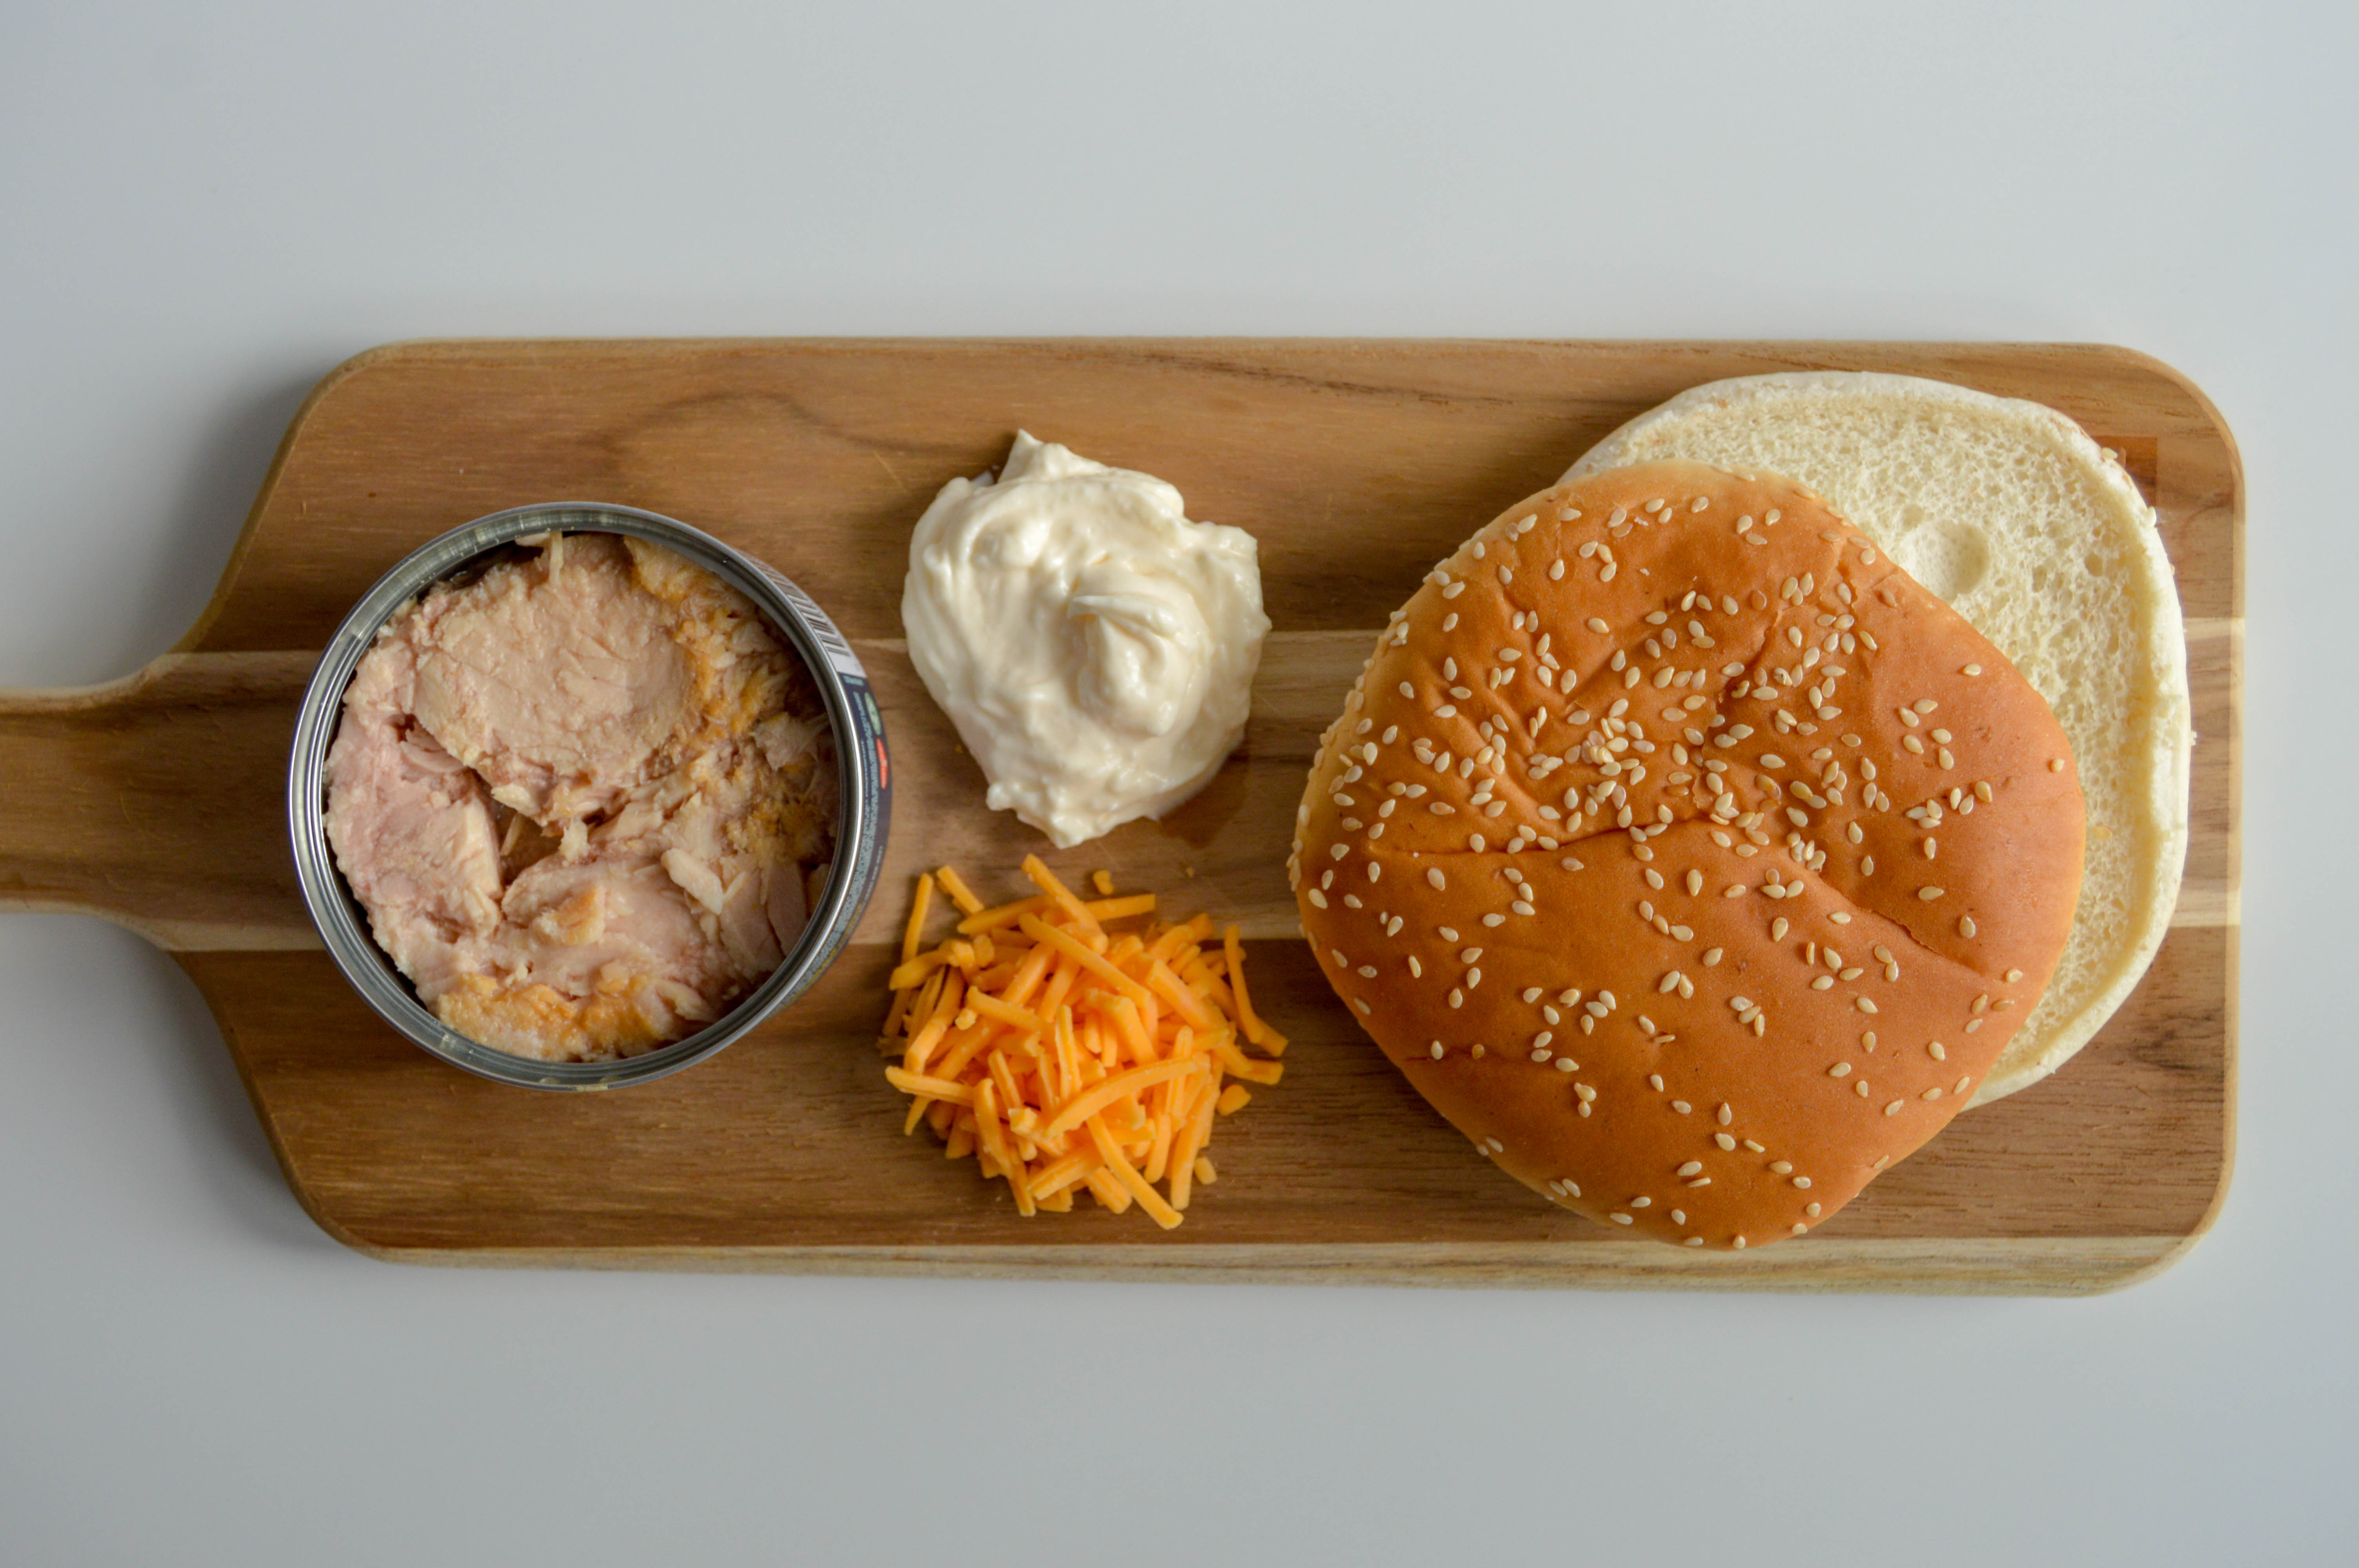 Simple ingredients for how to make tuna melt bunwiches.